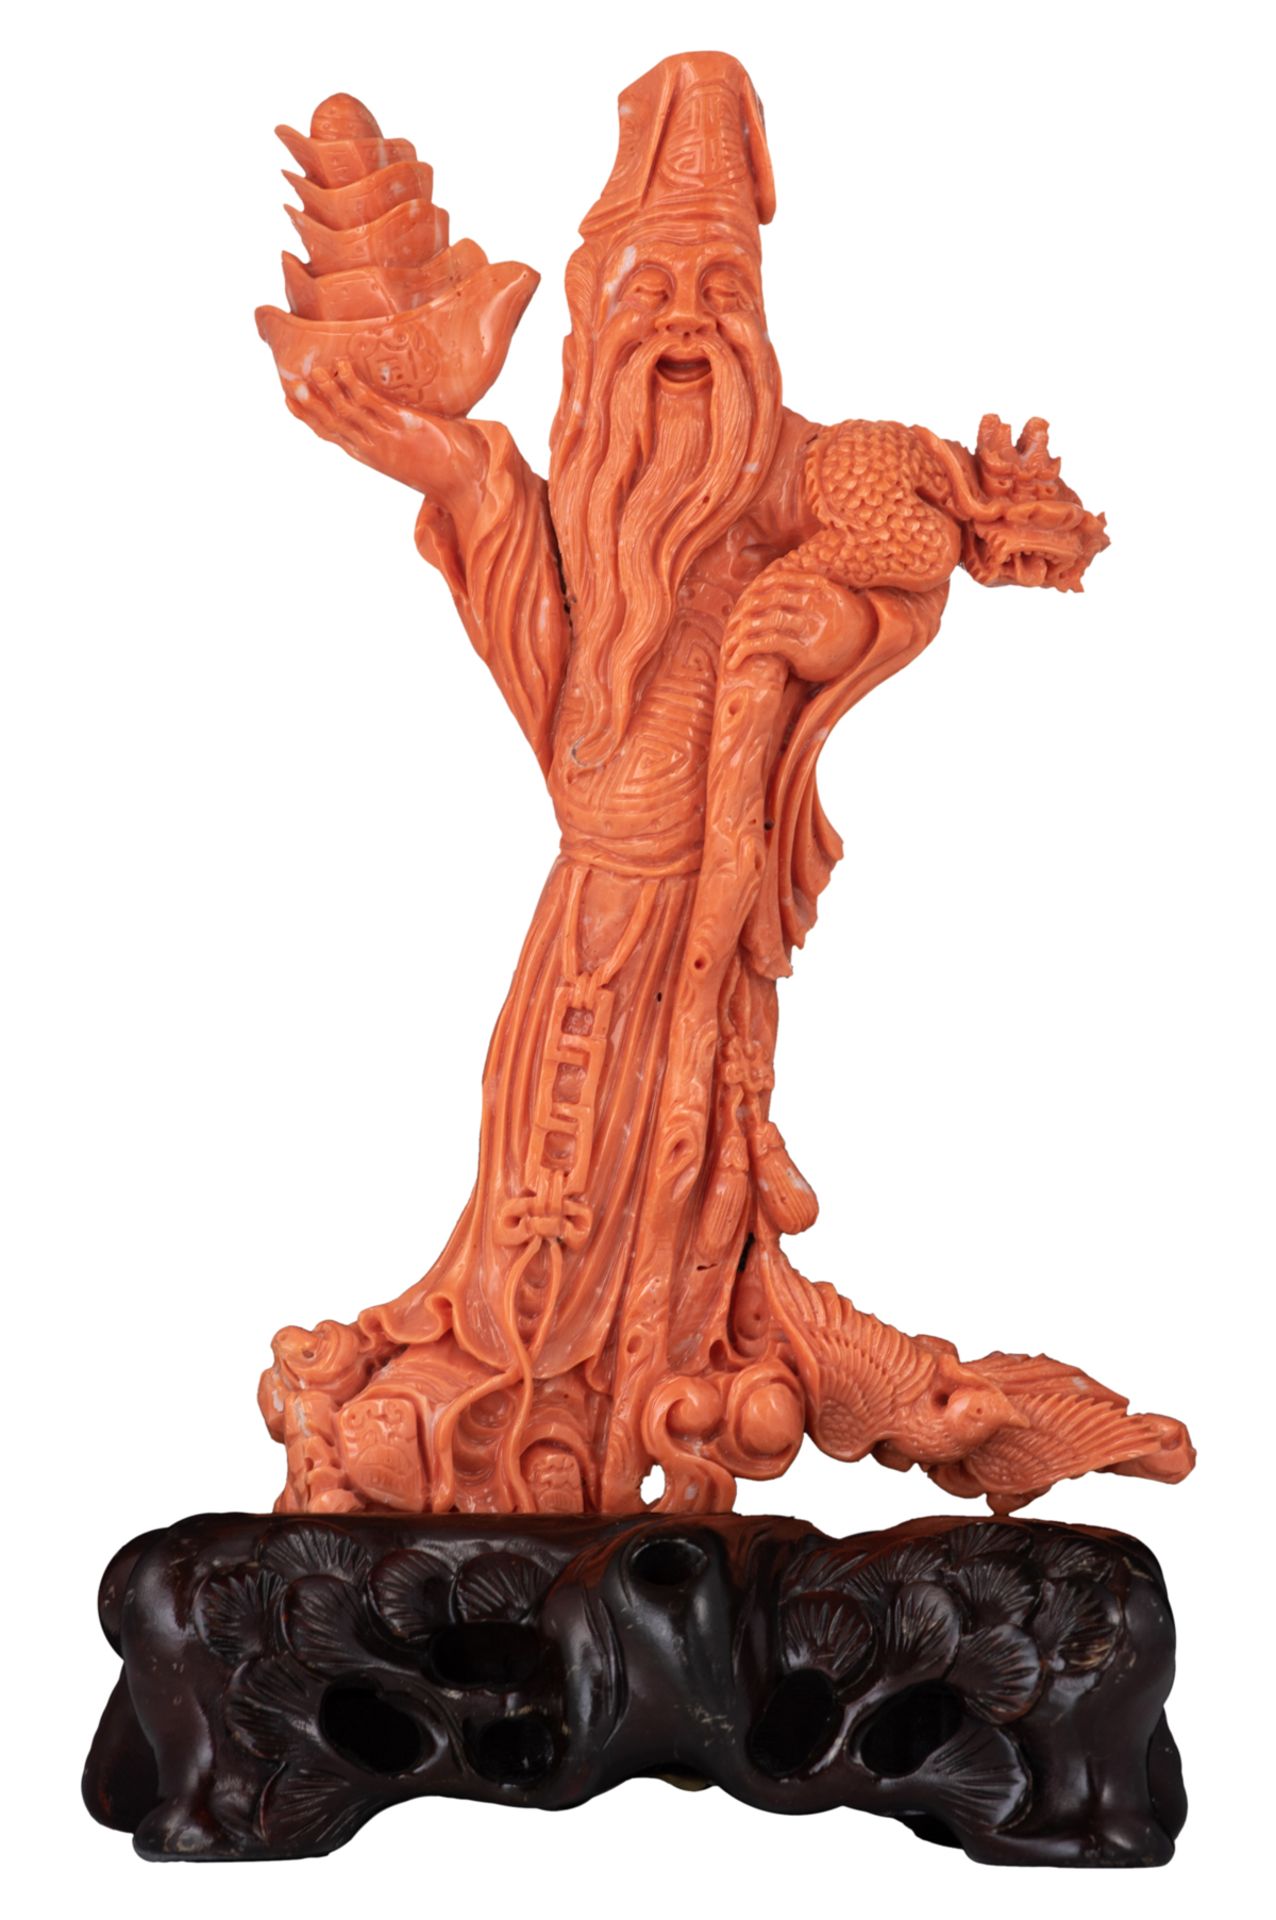 A fine red coral sculpture, depicting Tsai Shen Yeh, the God of Wealth, on a matching hardwooden bas